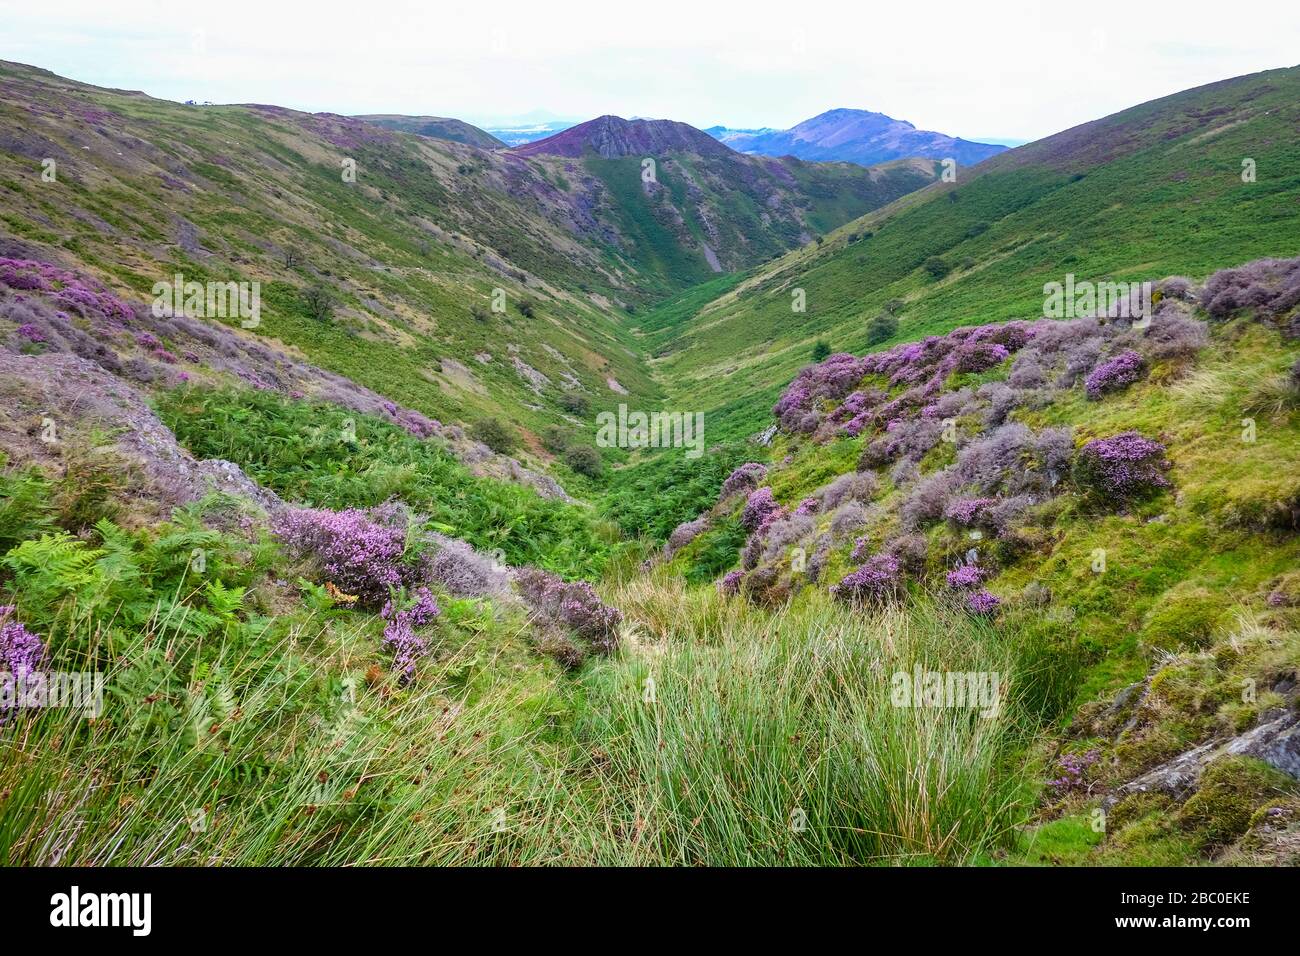 The Long Mynd range on the outskirts of the town of Church Stretton in the Shropshire Hills Area of Outstanding Natural Beauty, UK Stock Photo